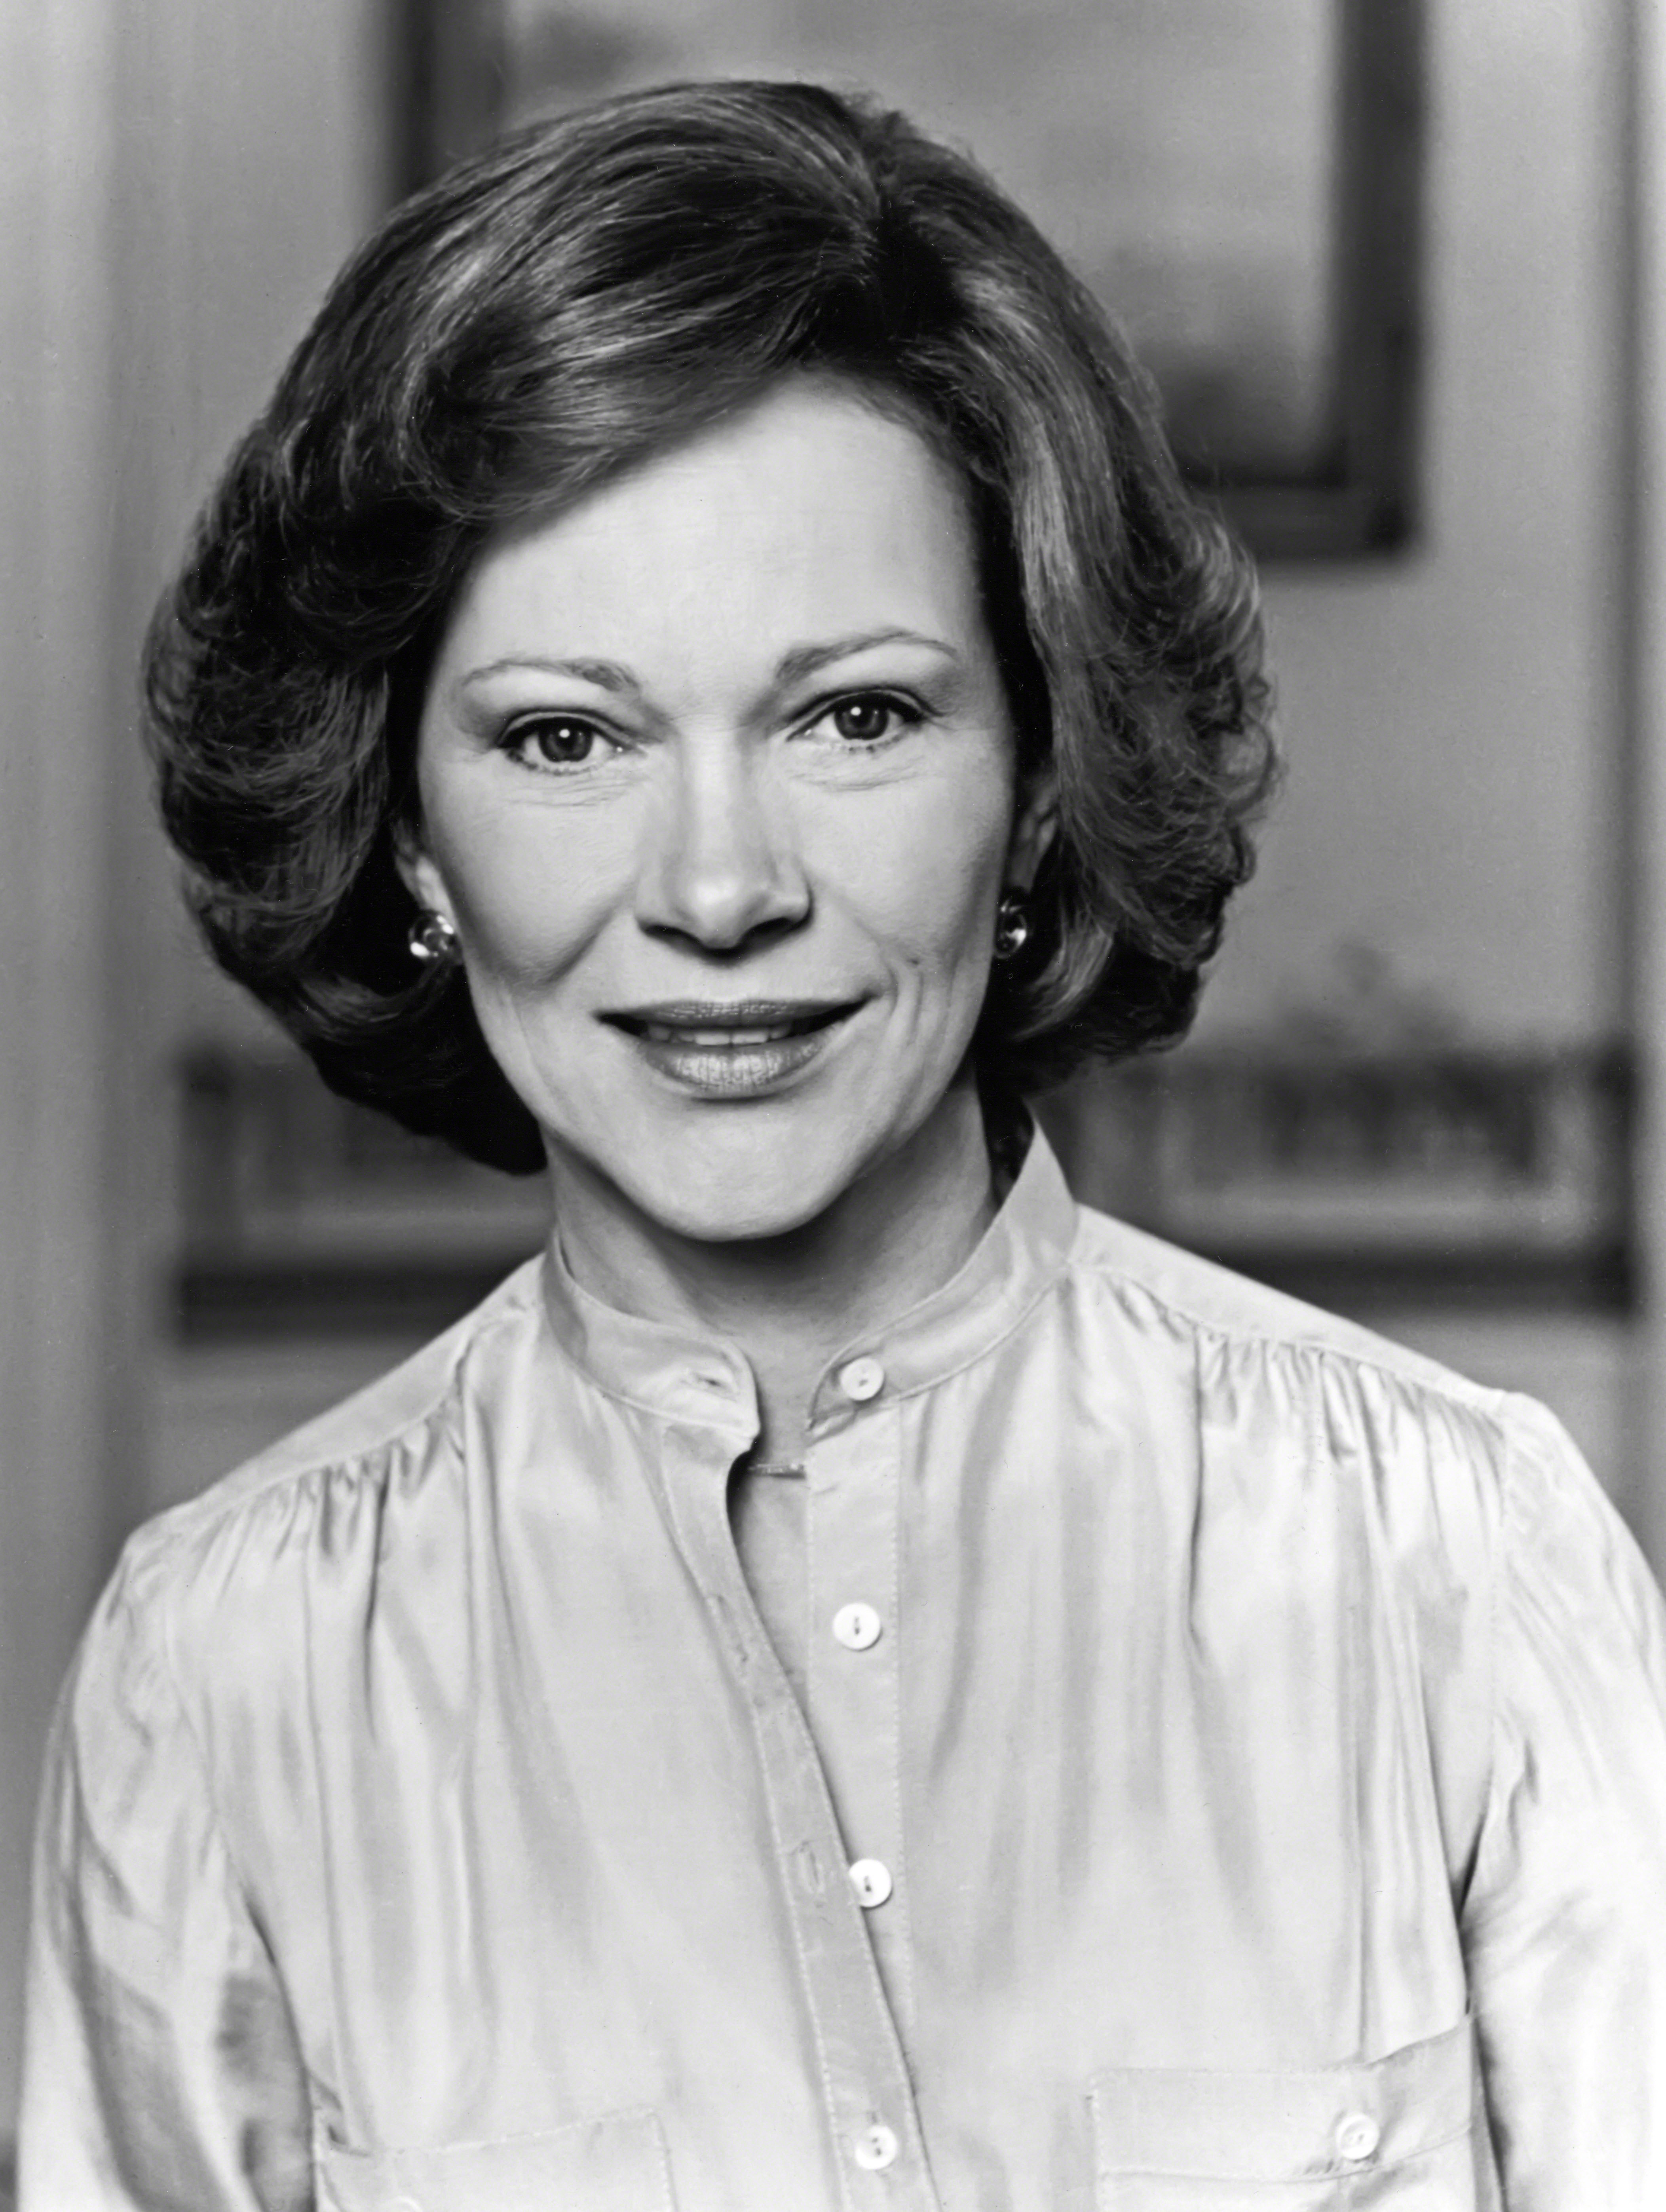 Former U.S. First Lady Rosalynn Carter pictured in the 1970s. | Source: Getty Images